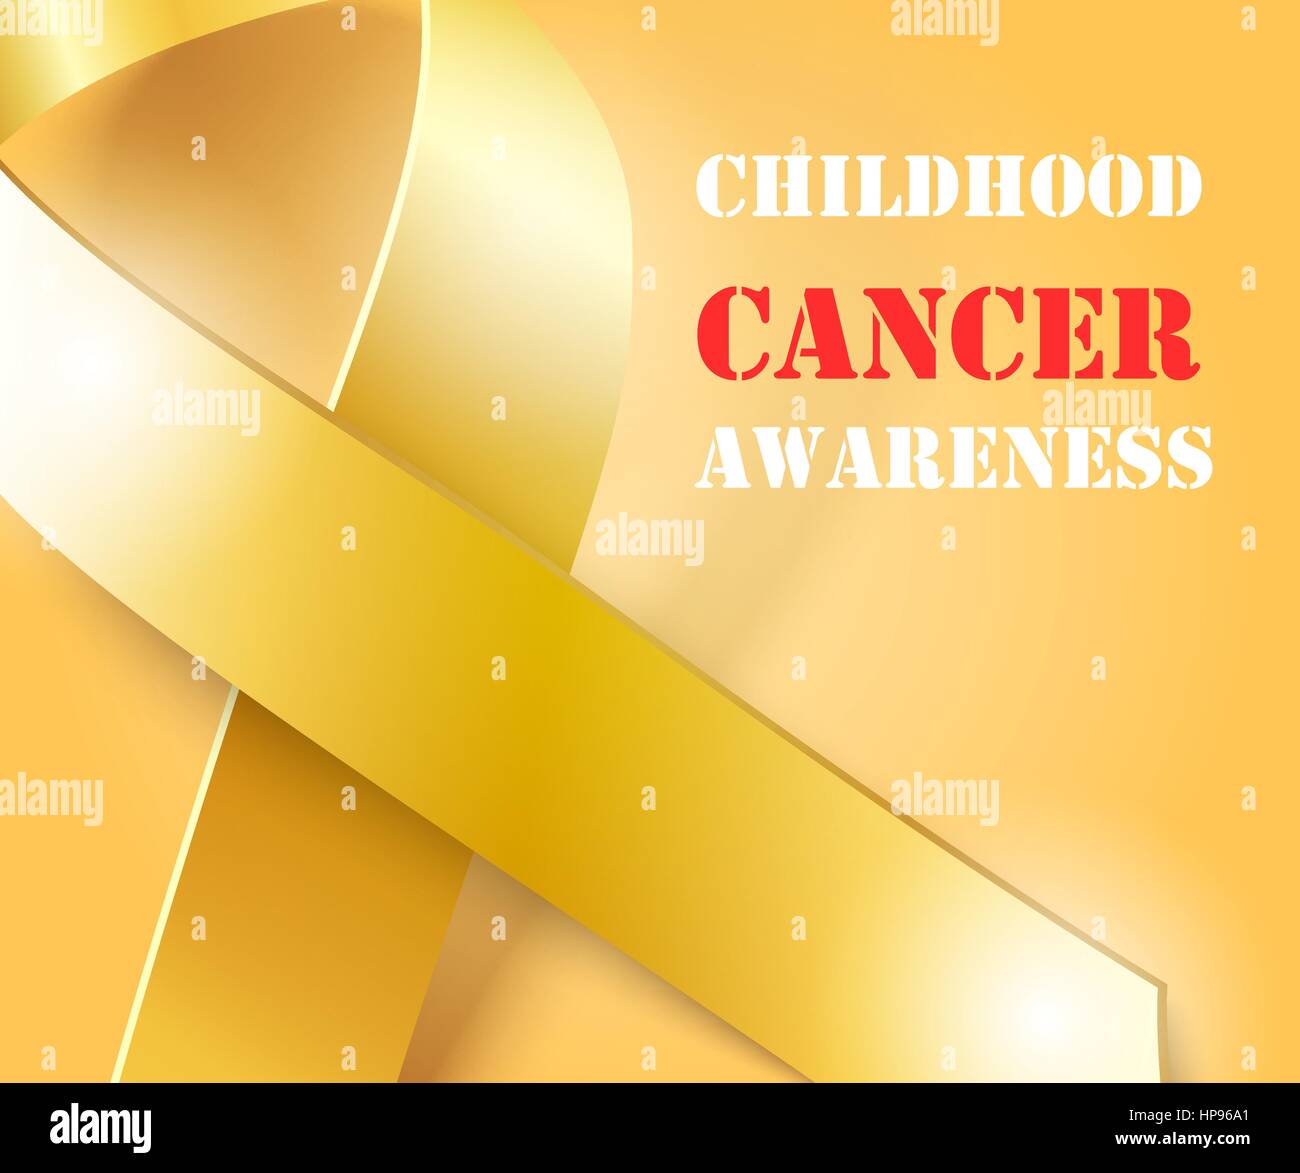 Childhood Cancer Awareness concept , golden background with gold ribbon, vector illustration Stock Vector